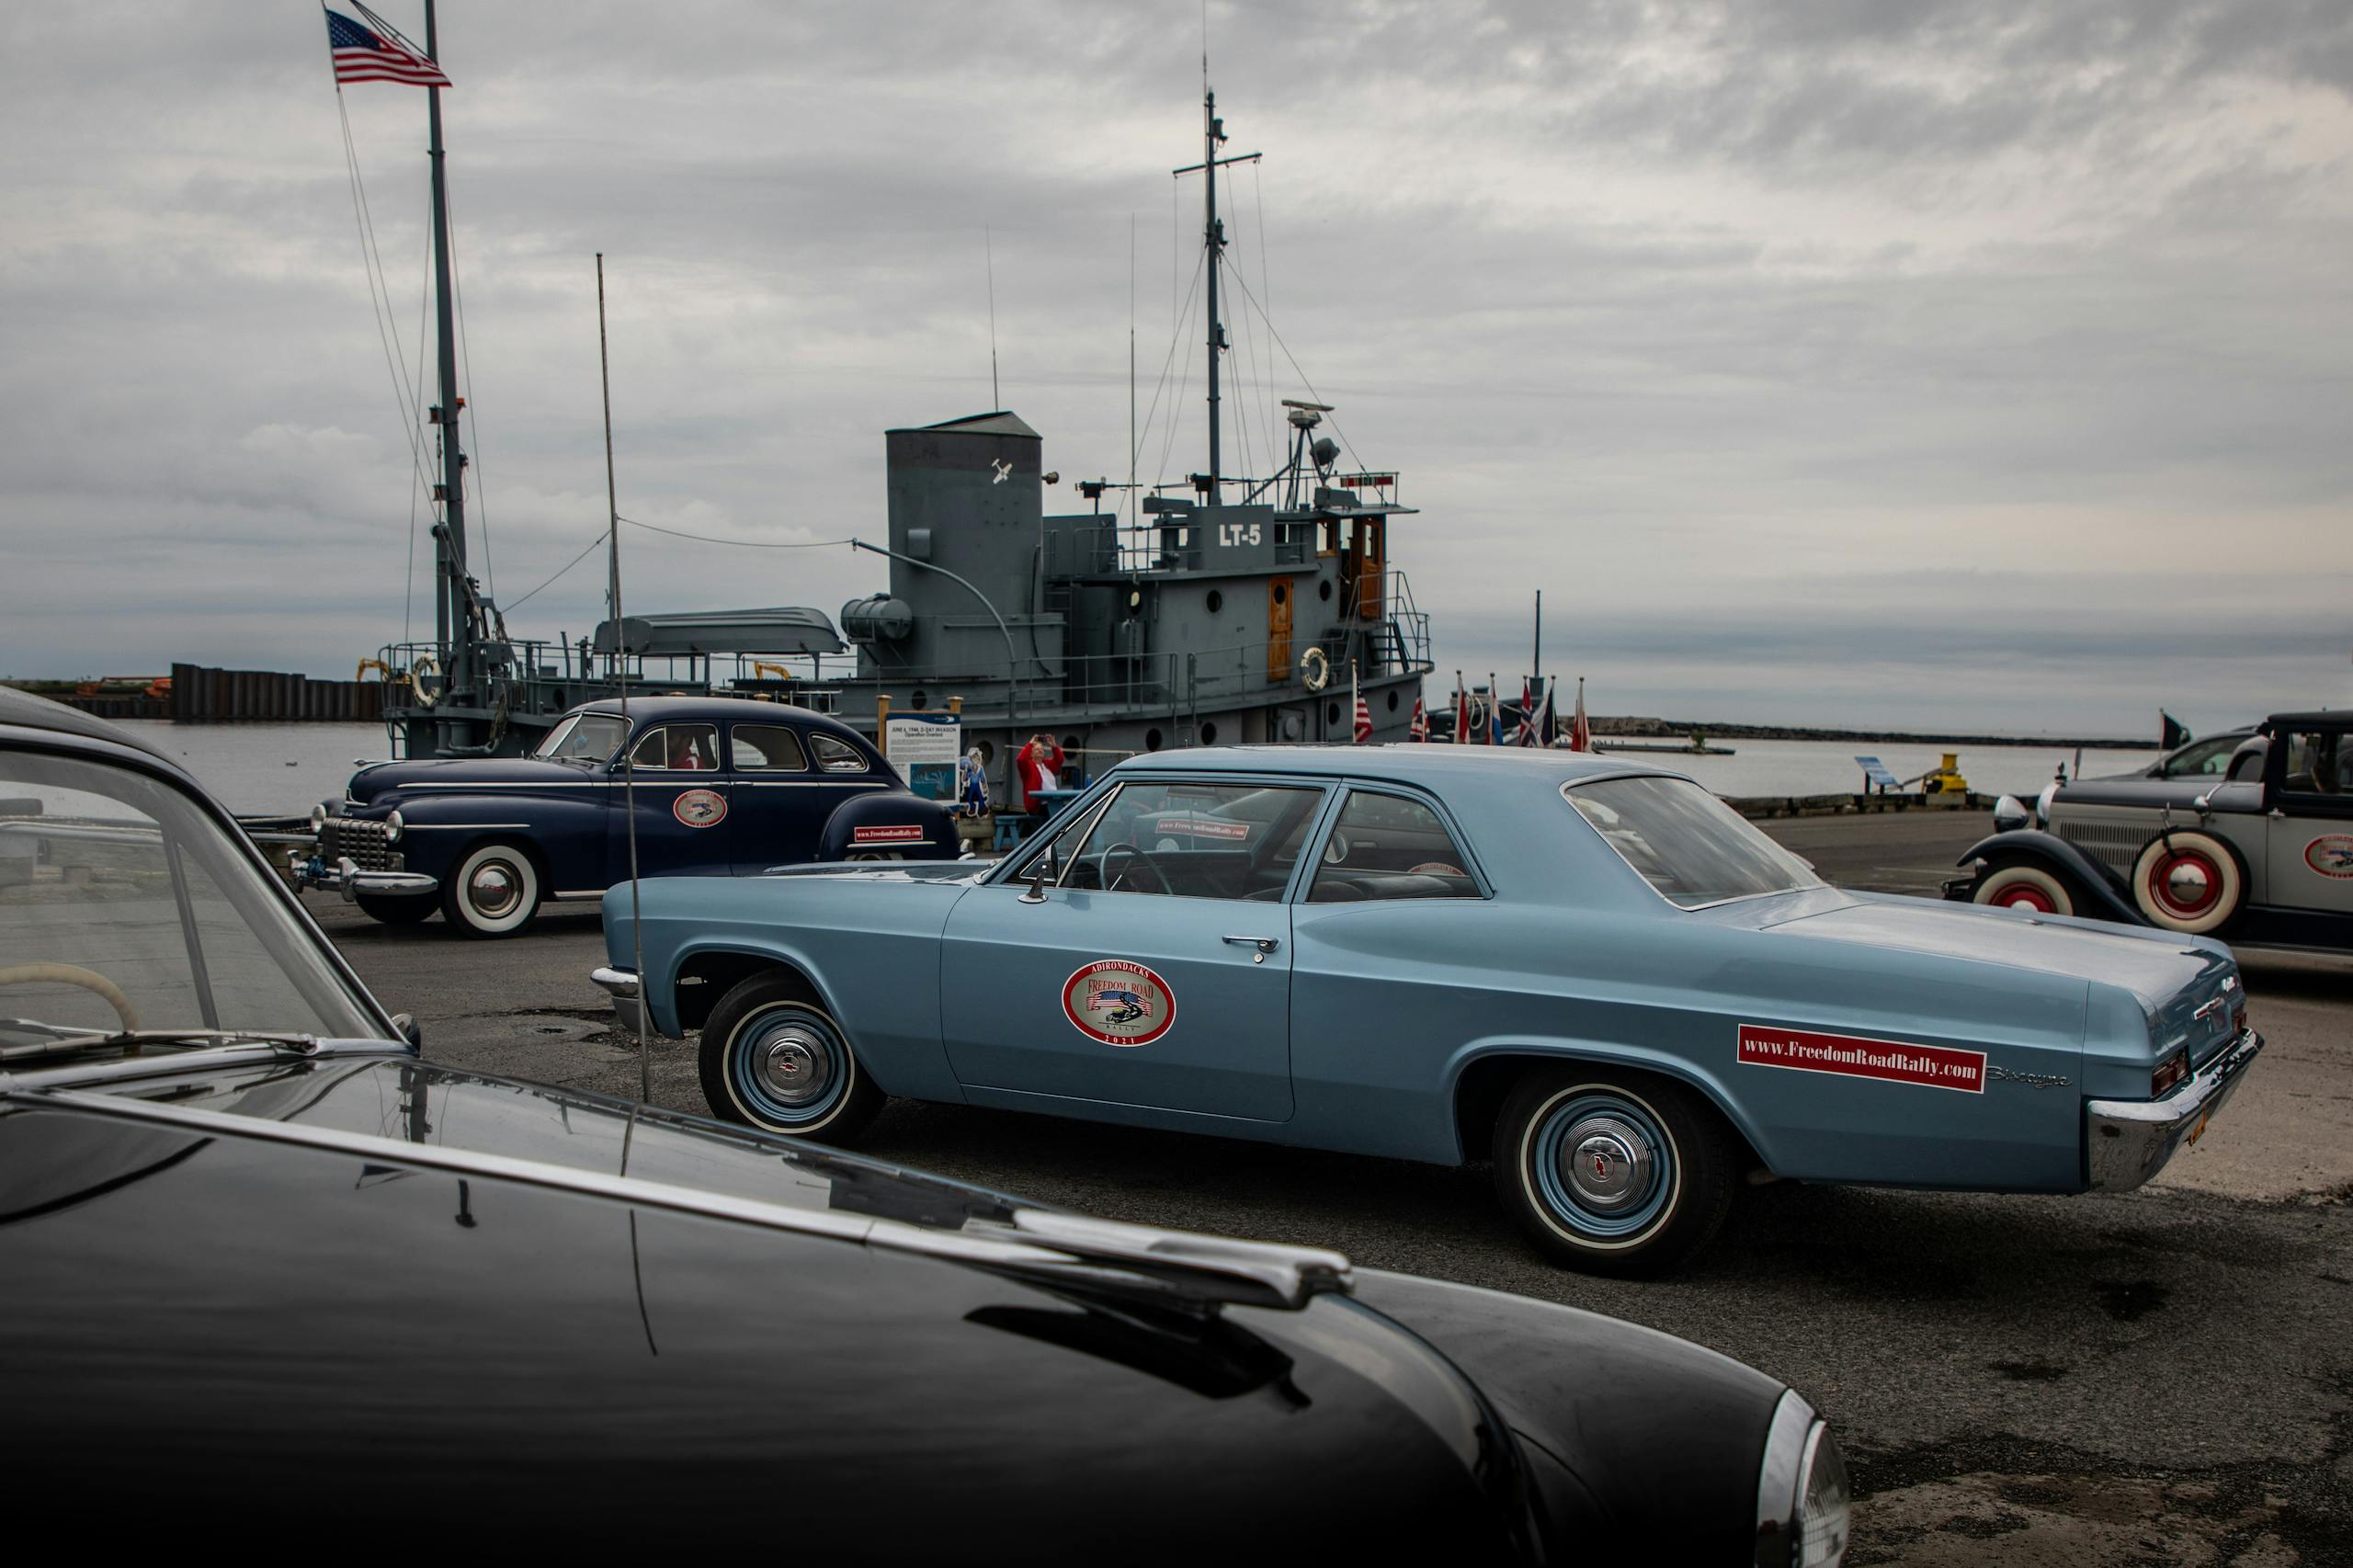 Freedom Road Rally group cars and military ship